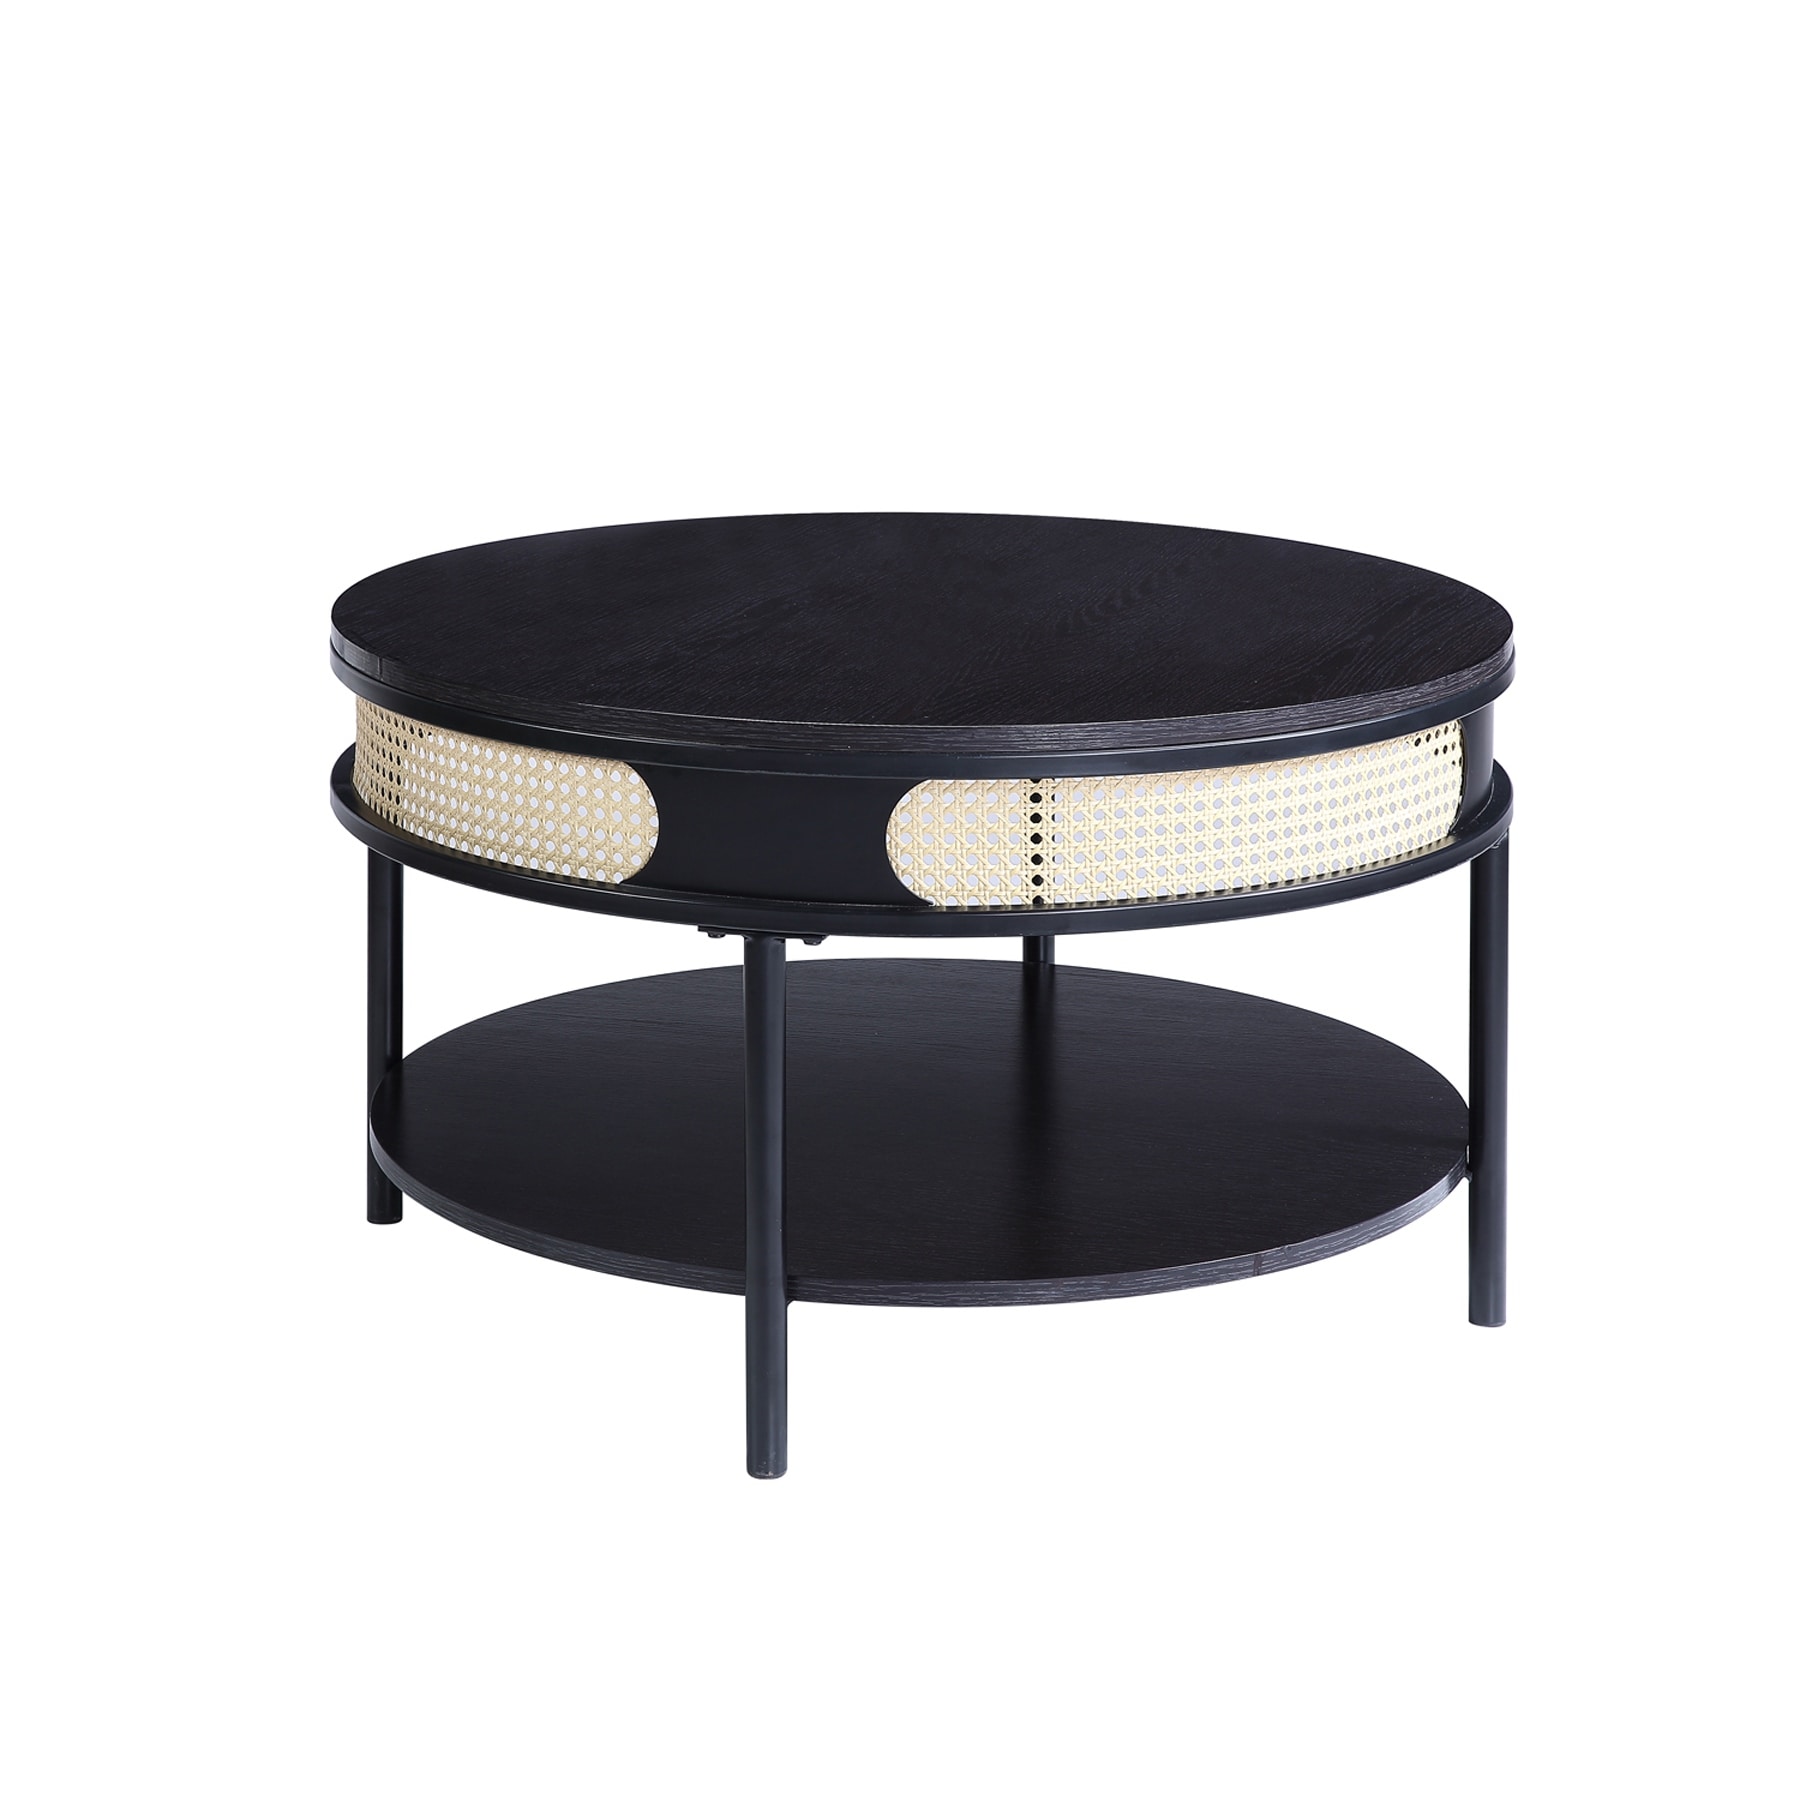 1 Open Shelf Round Coffee Table with Metal Legs in Black Finish